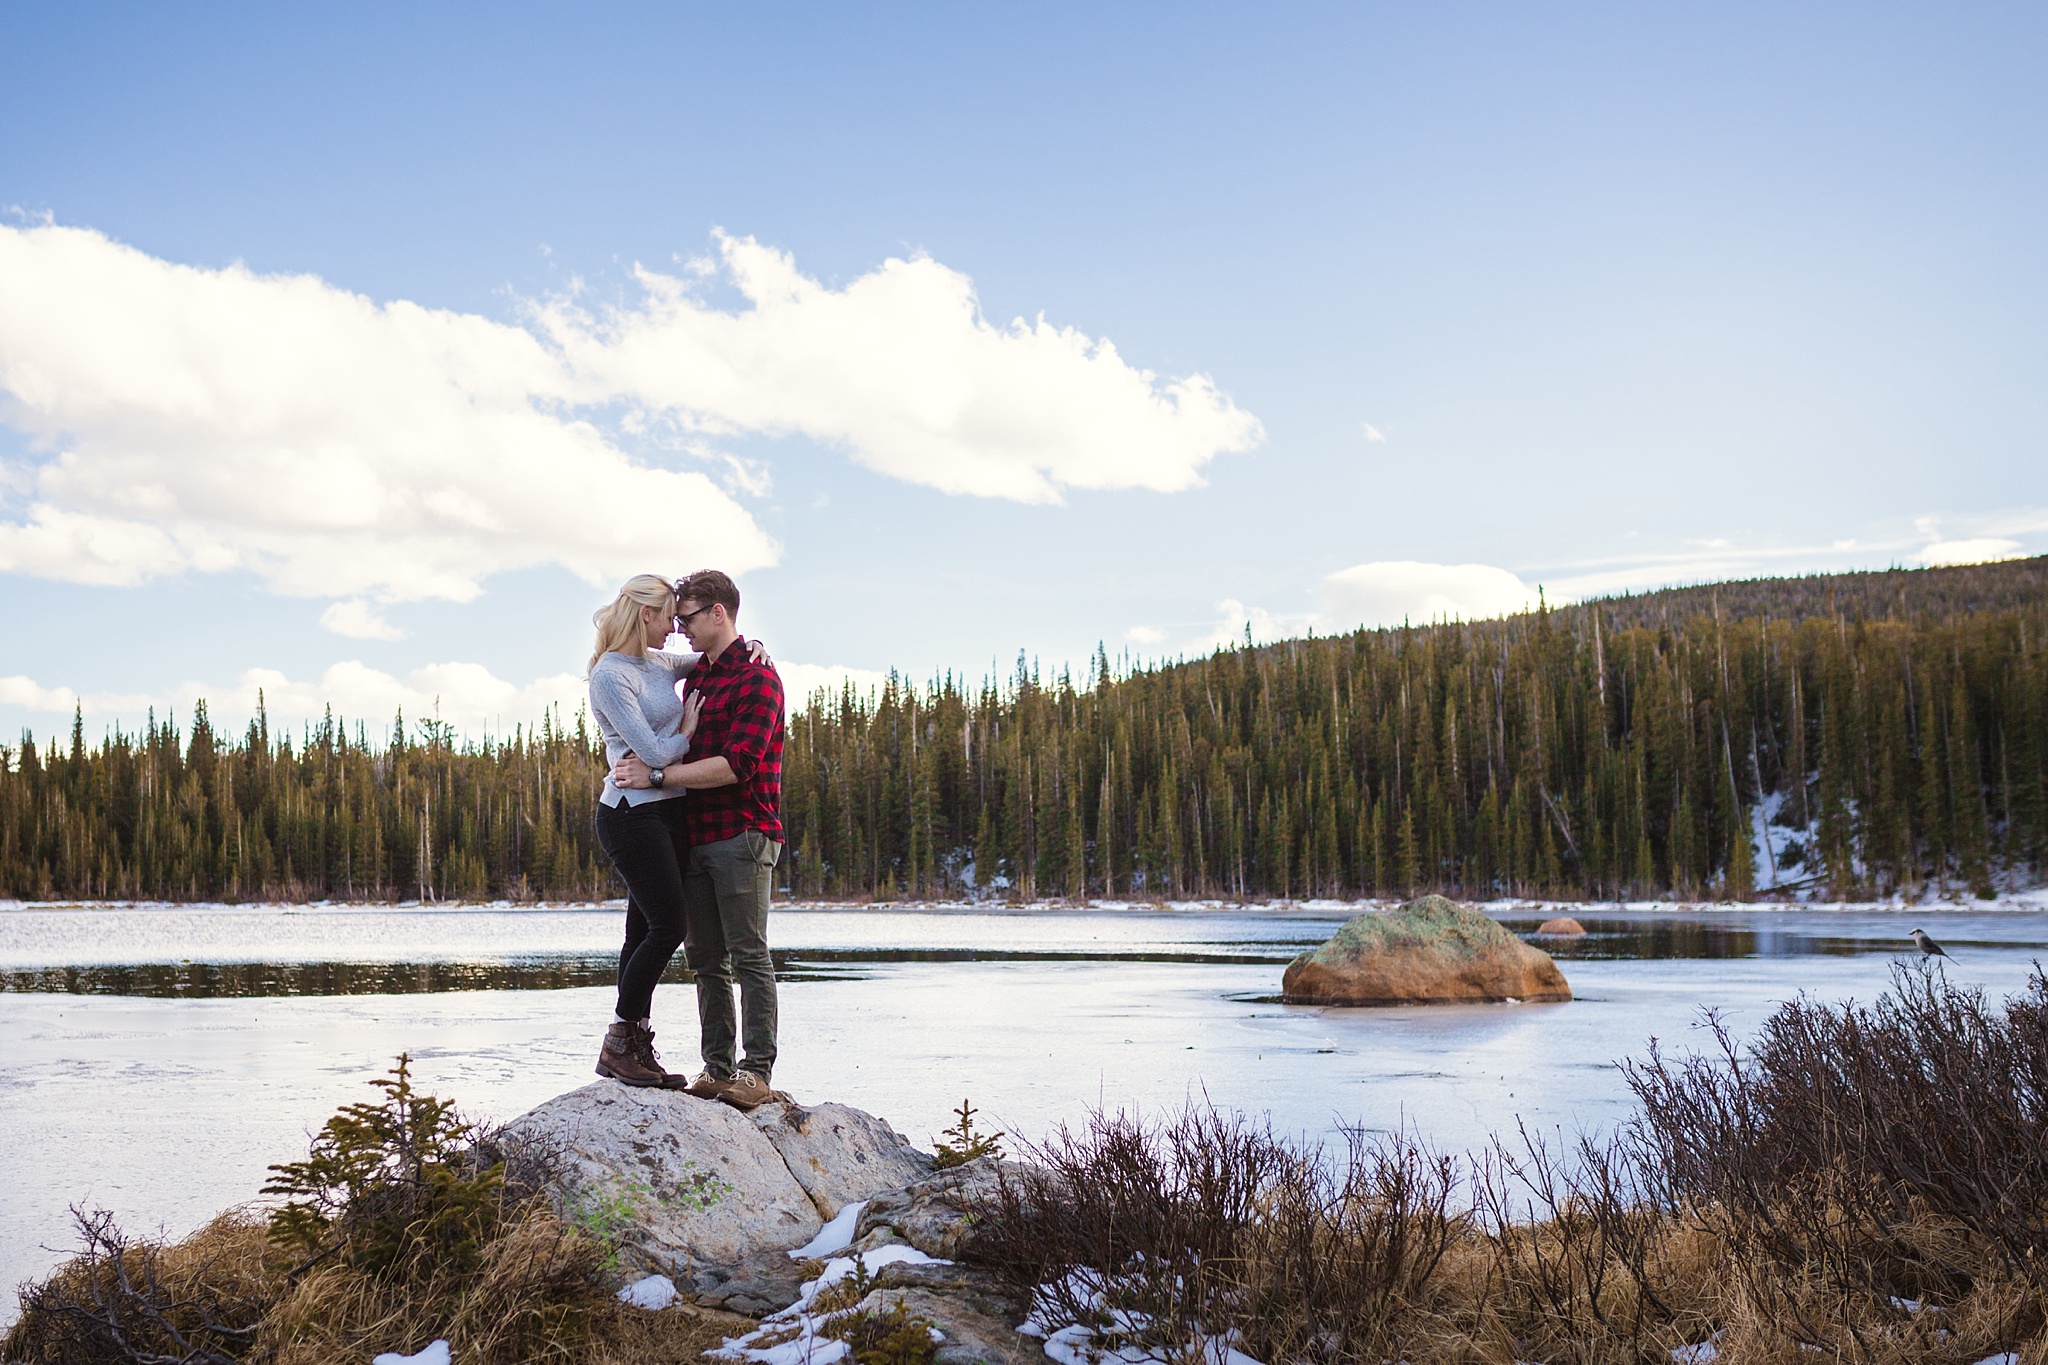 Couple embracing with a lake and mountain views during their Colorado engagement session. Amy & Jonathan’s Brainard Lake Winter Engagement Session by Colorado Engagement Photographer, Jennifer Garza. Colorado Engagement Photographer, Colorado Engagement Photography, Brainard Lake Engagement Session, Brainard Lake Engagement Photos, Mountain Engagement Session, Colorado Winter Engagement Photos, Winter Engagement Photography, Mountain Engagement Photographer, Colorado Wedding, Colorado Bride